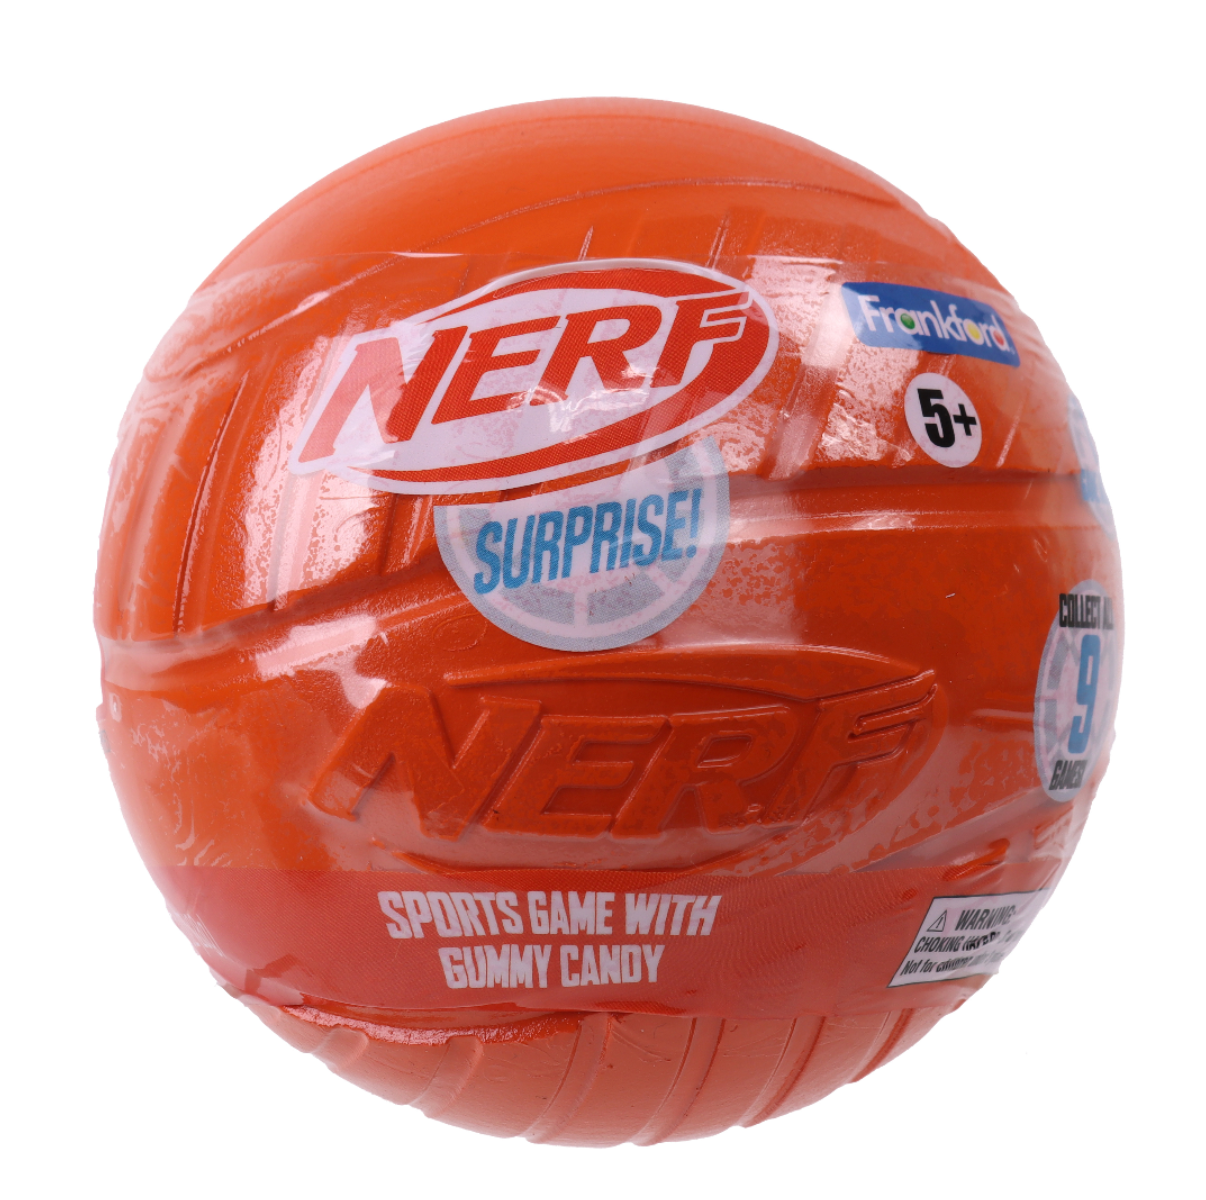 NERF Surprise Mini Sports Game and Gummy Candy - 1pc